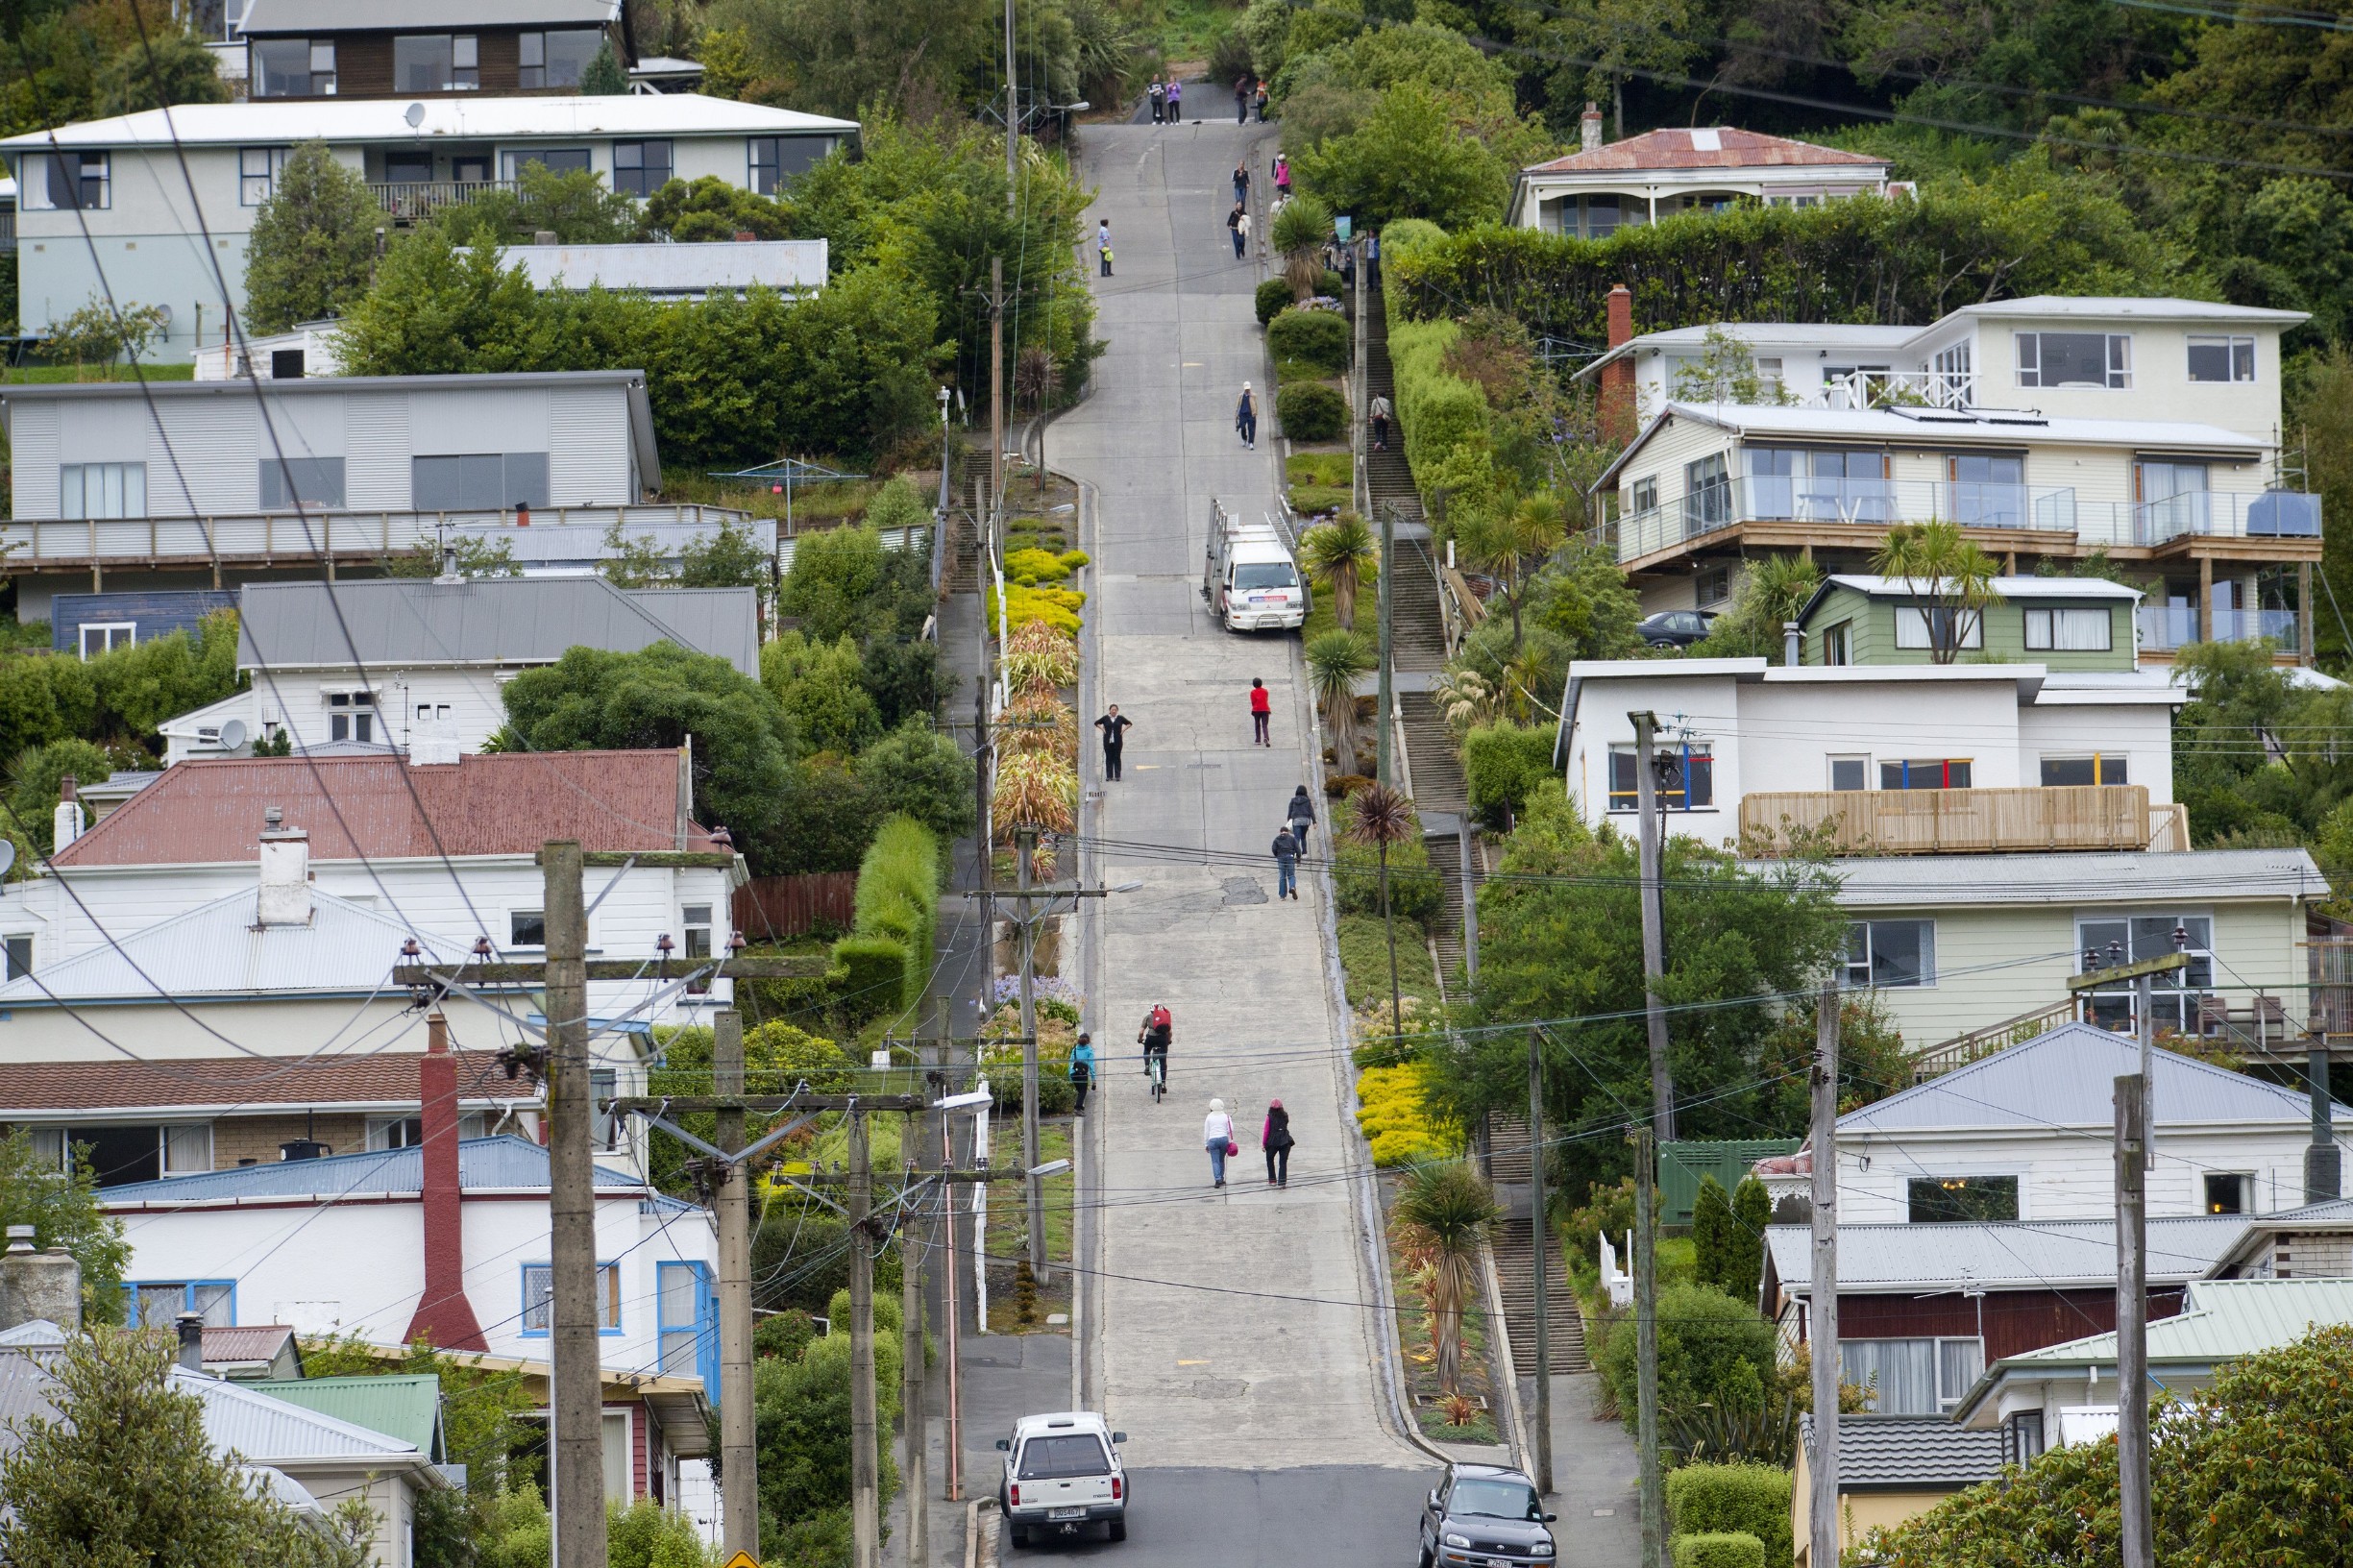 baldwin street,the steepest street in the world,in dunedin,new zealand, Image: 337539443, License: Royalty-free, Restrictions: , Model Release: no, Credit line: Uwe Moser / Panthermedia / Profimedia